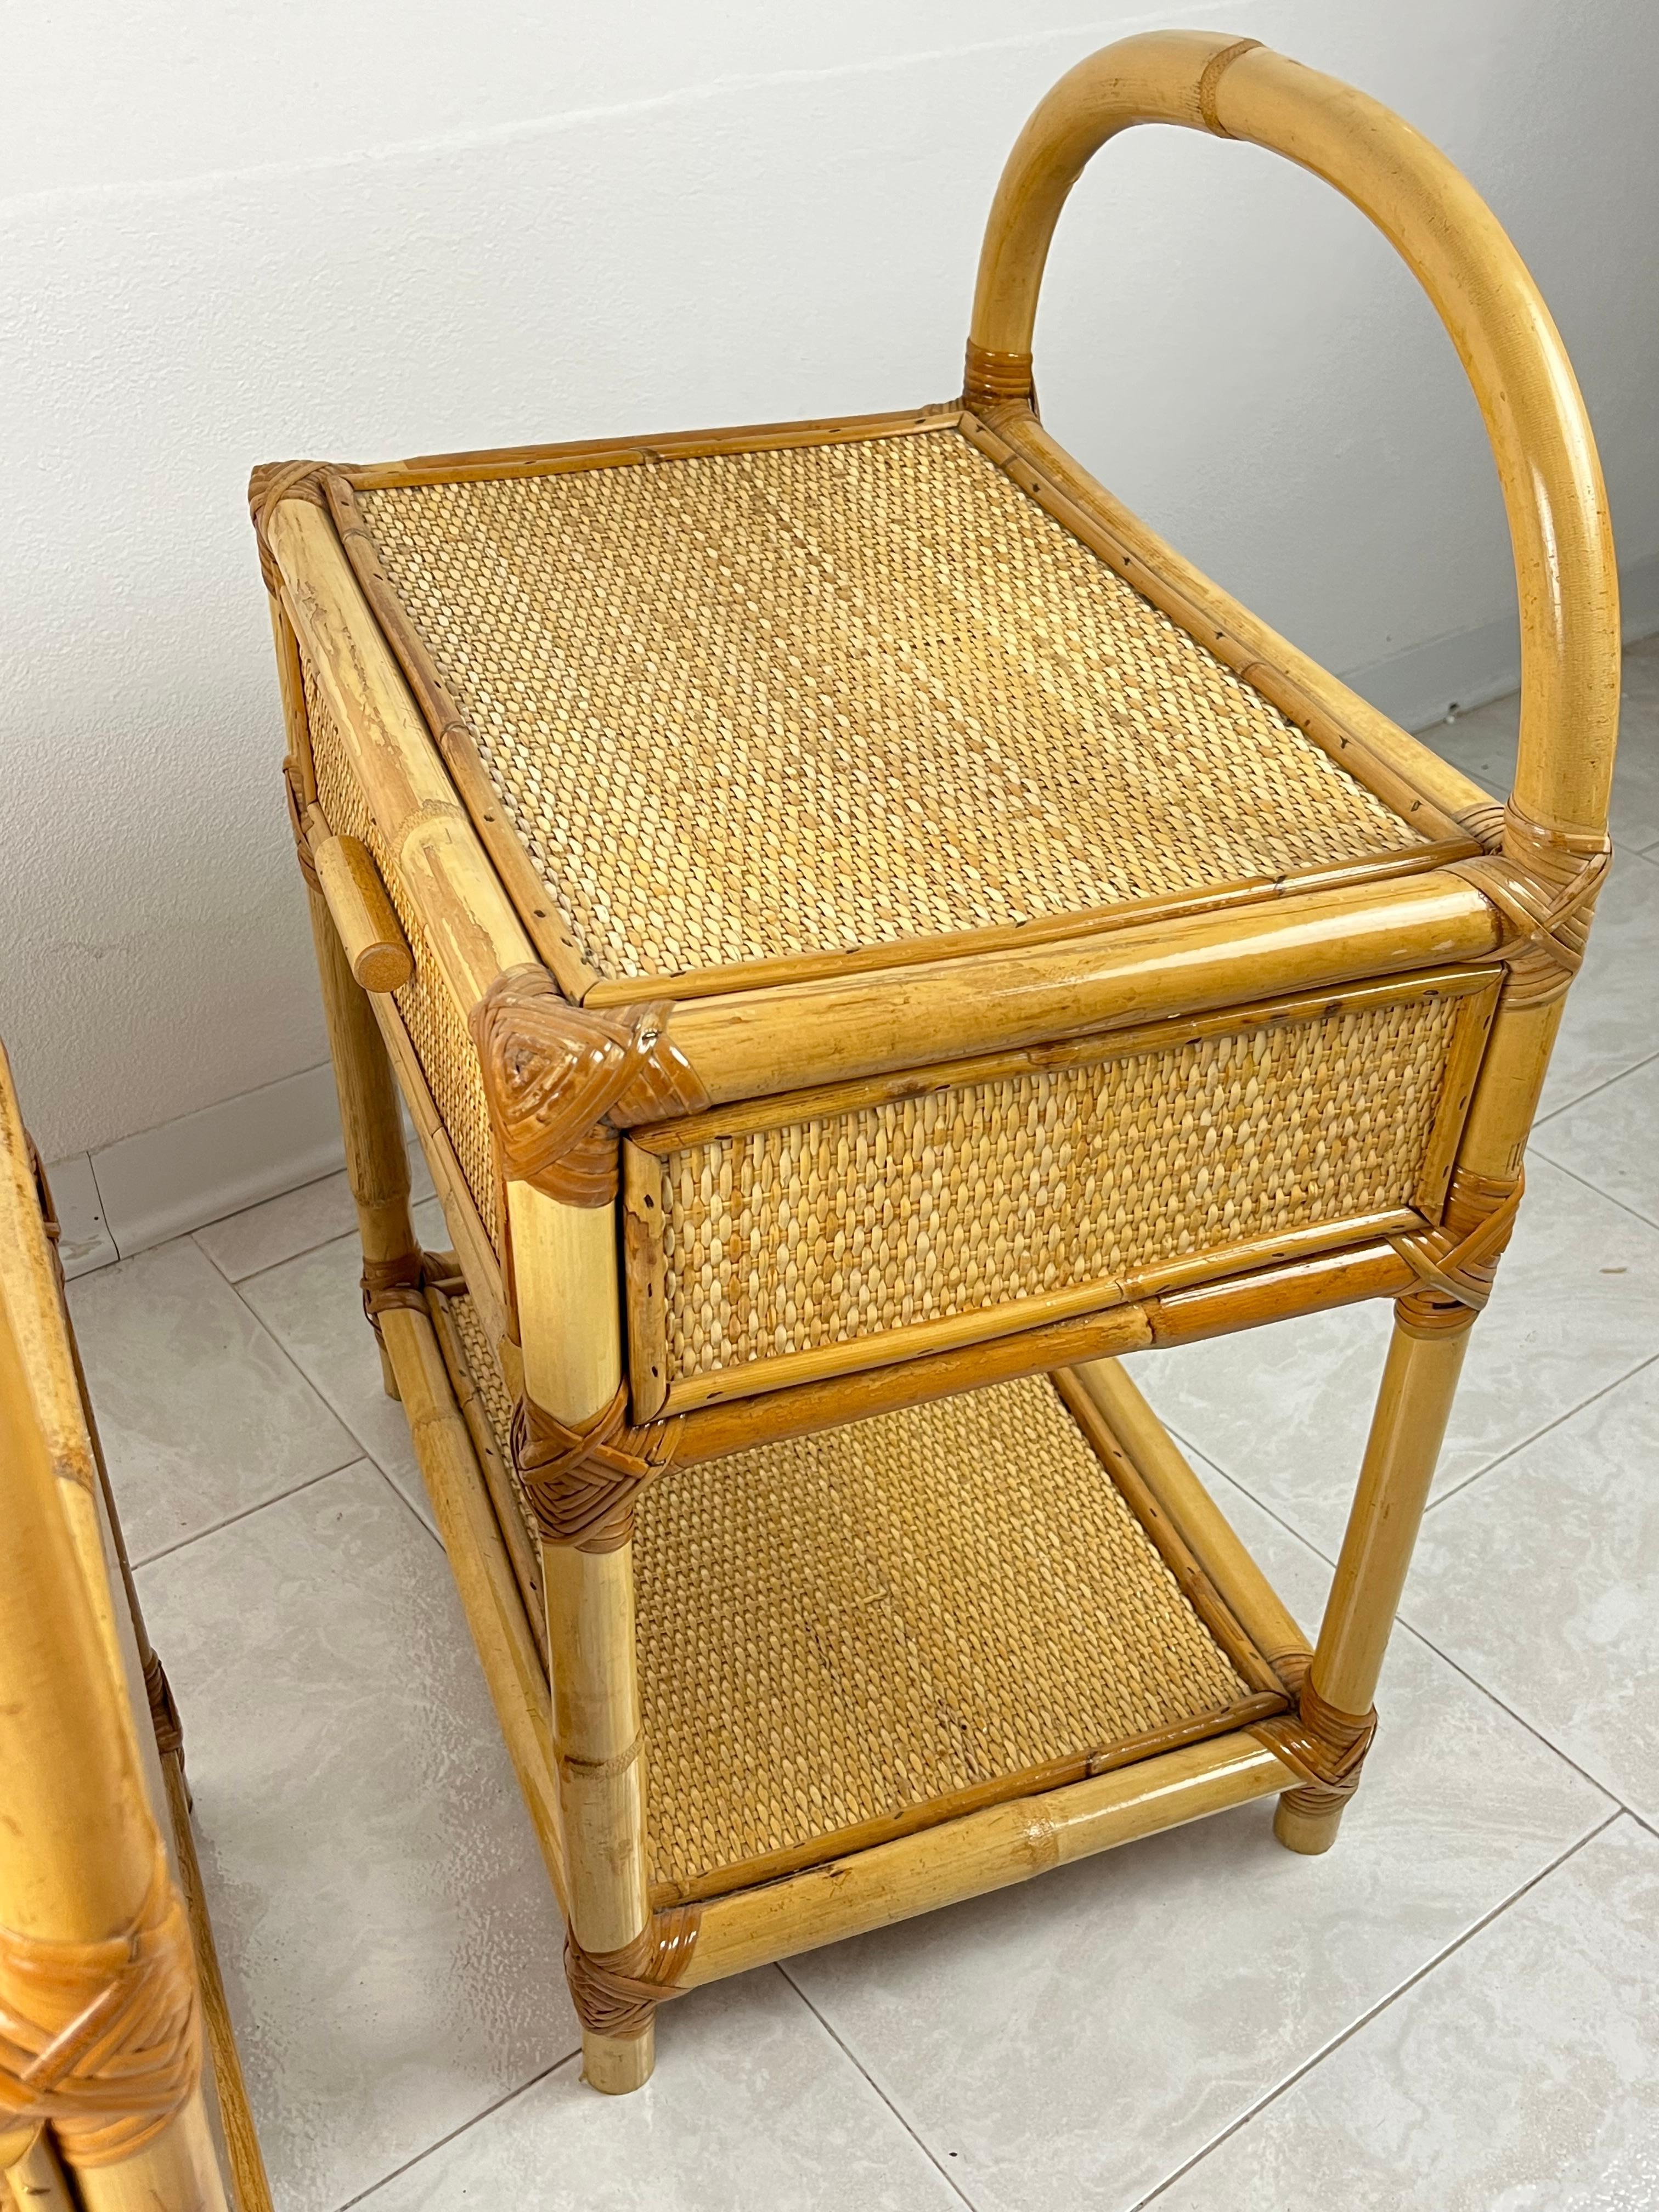 Pair of Vintage Italian  Bamboo and Rattan Bedside Tables 1970s For Sale 2